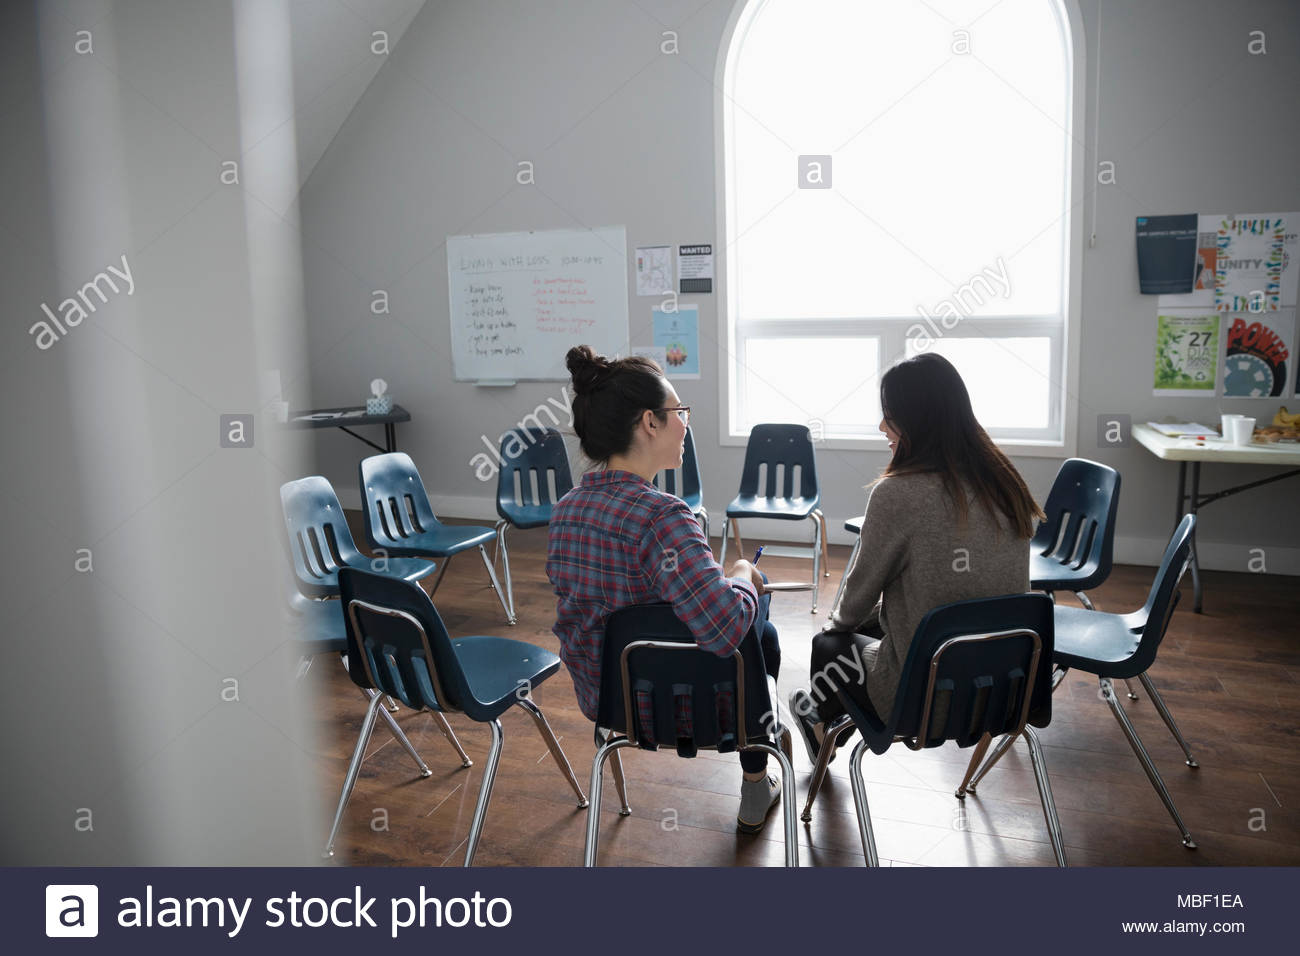 Women talking in circle at support group in community center Stock Photo